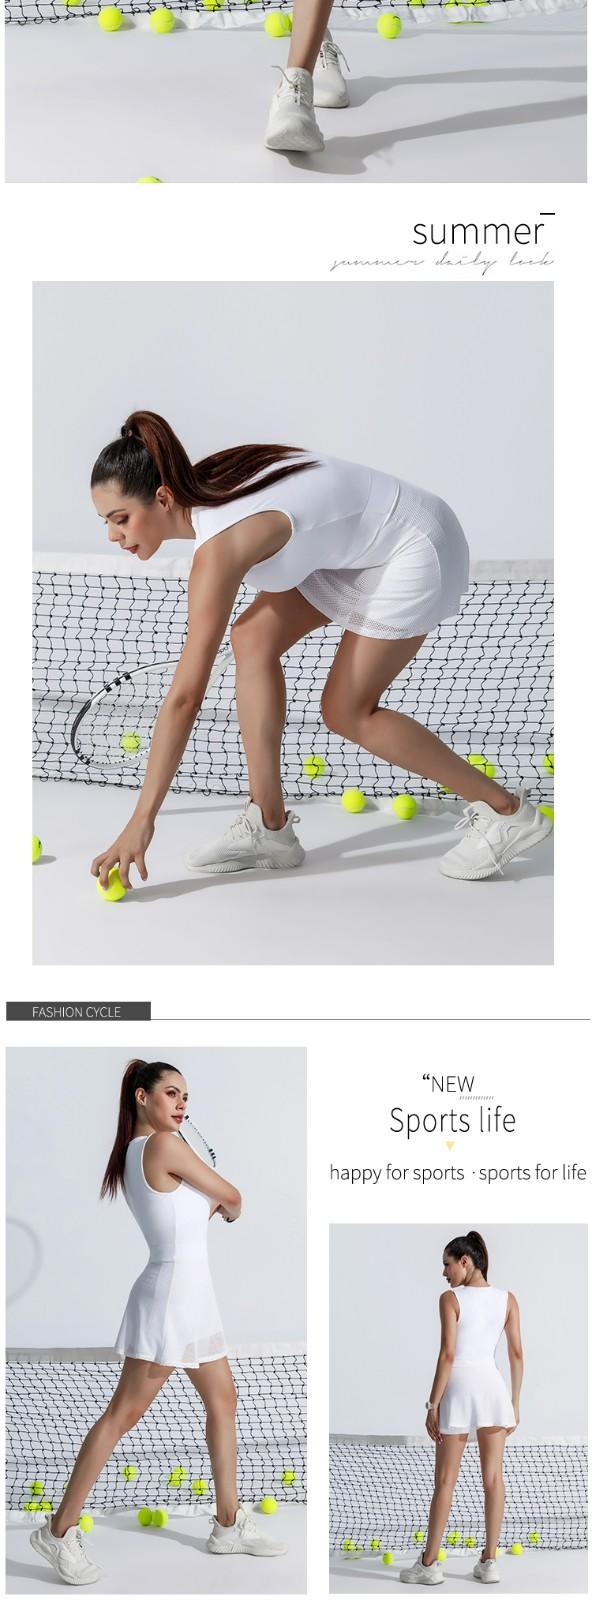 fashion women's tennis outfits type for yoga